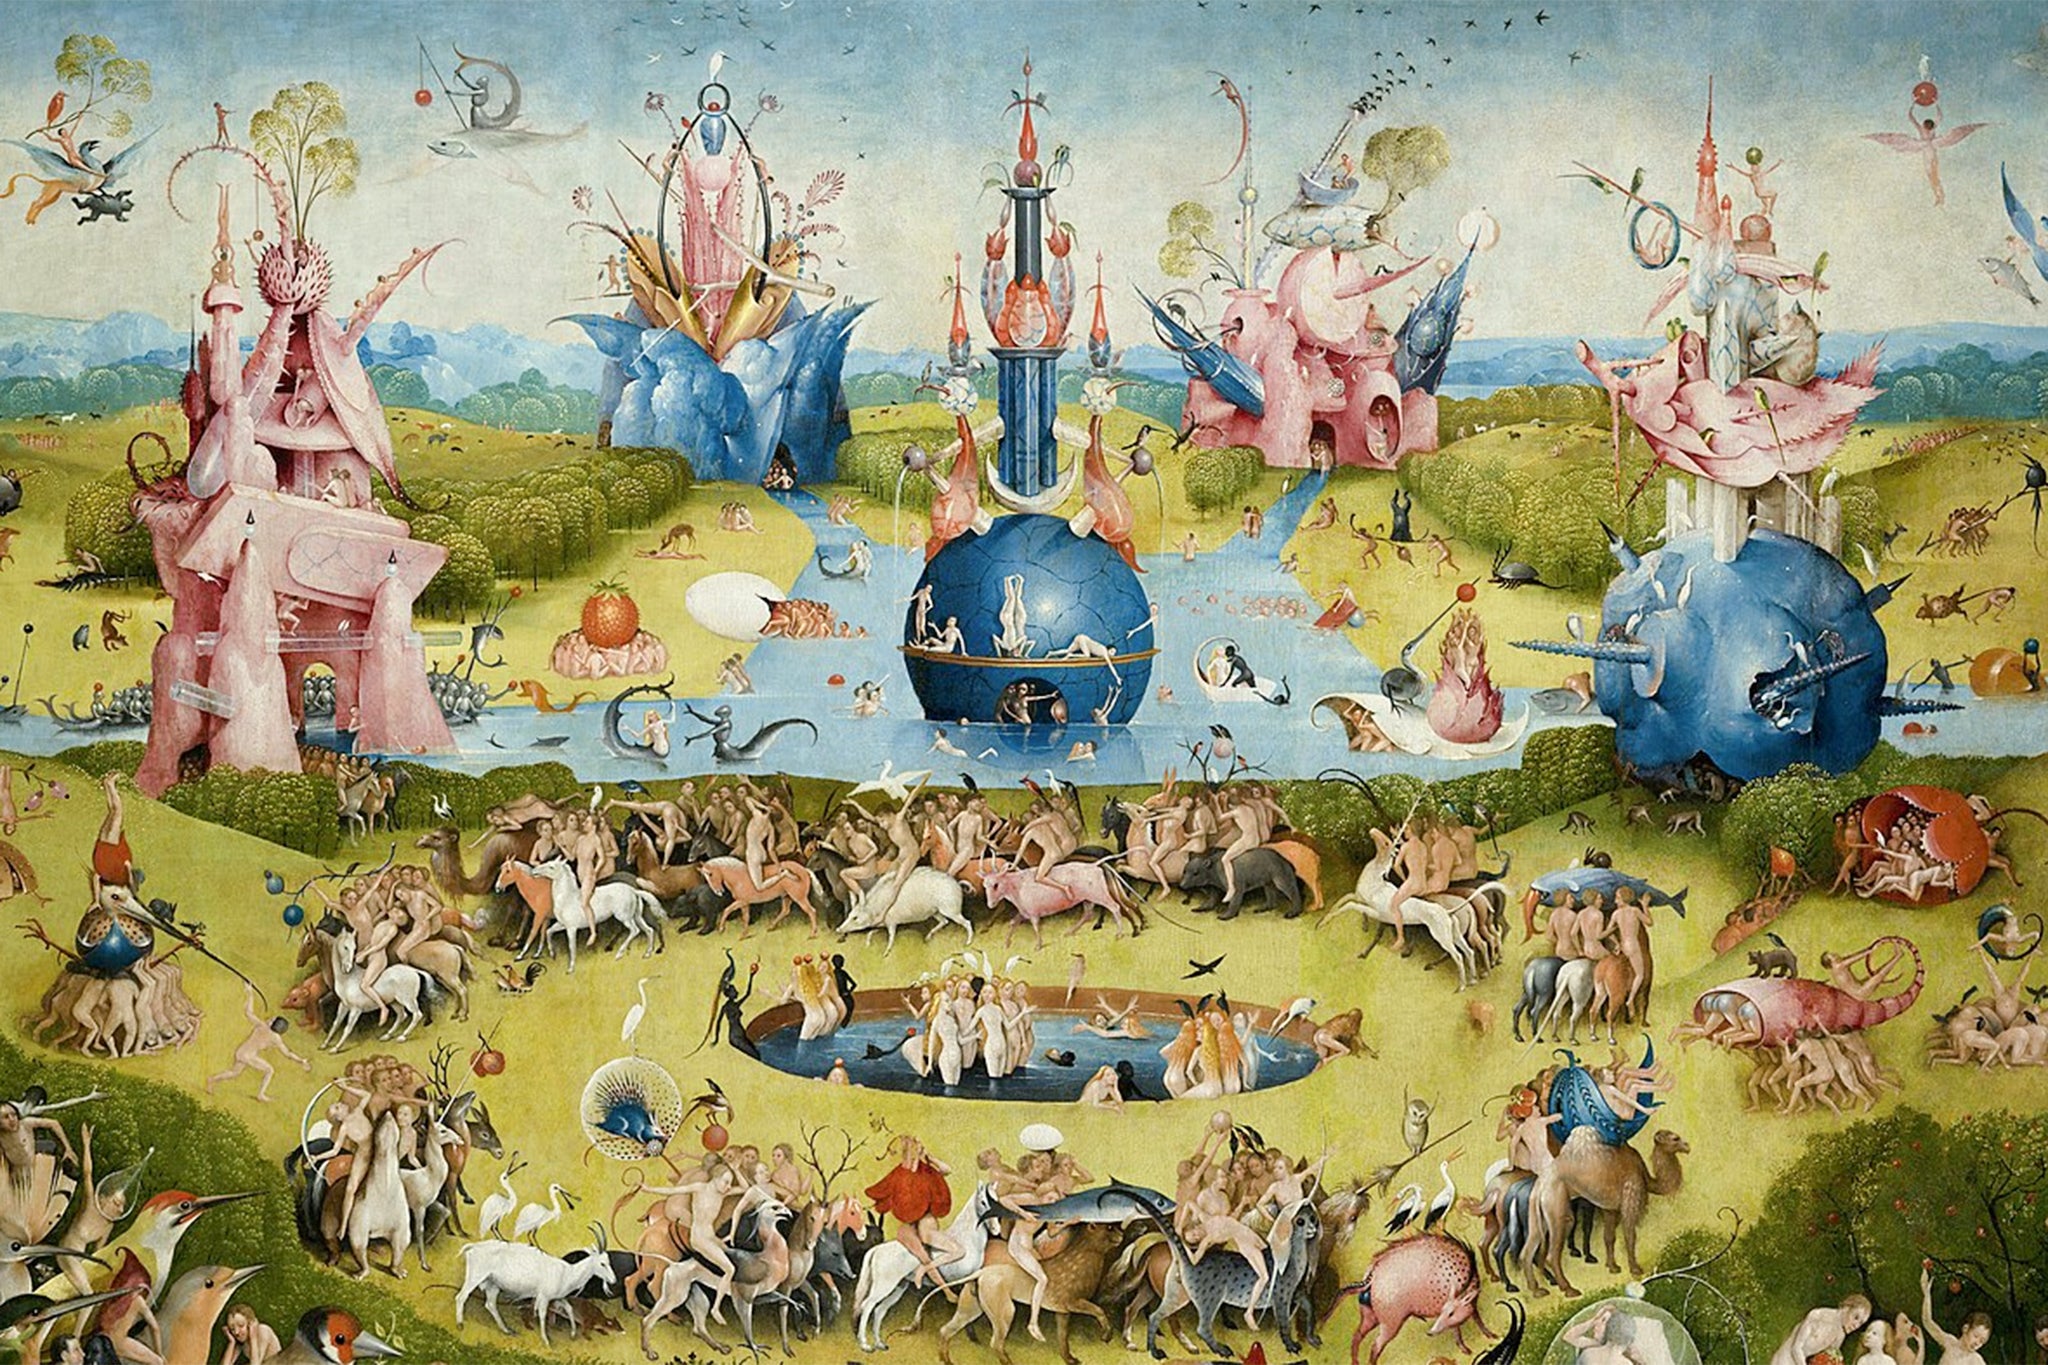 The Garden of Earthly Delights by the Dutch painter Hieronymus Bosch, completed in 1500